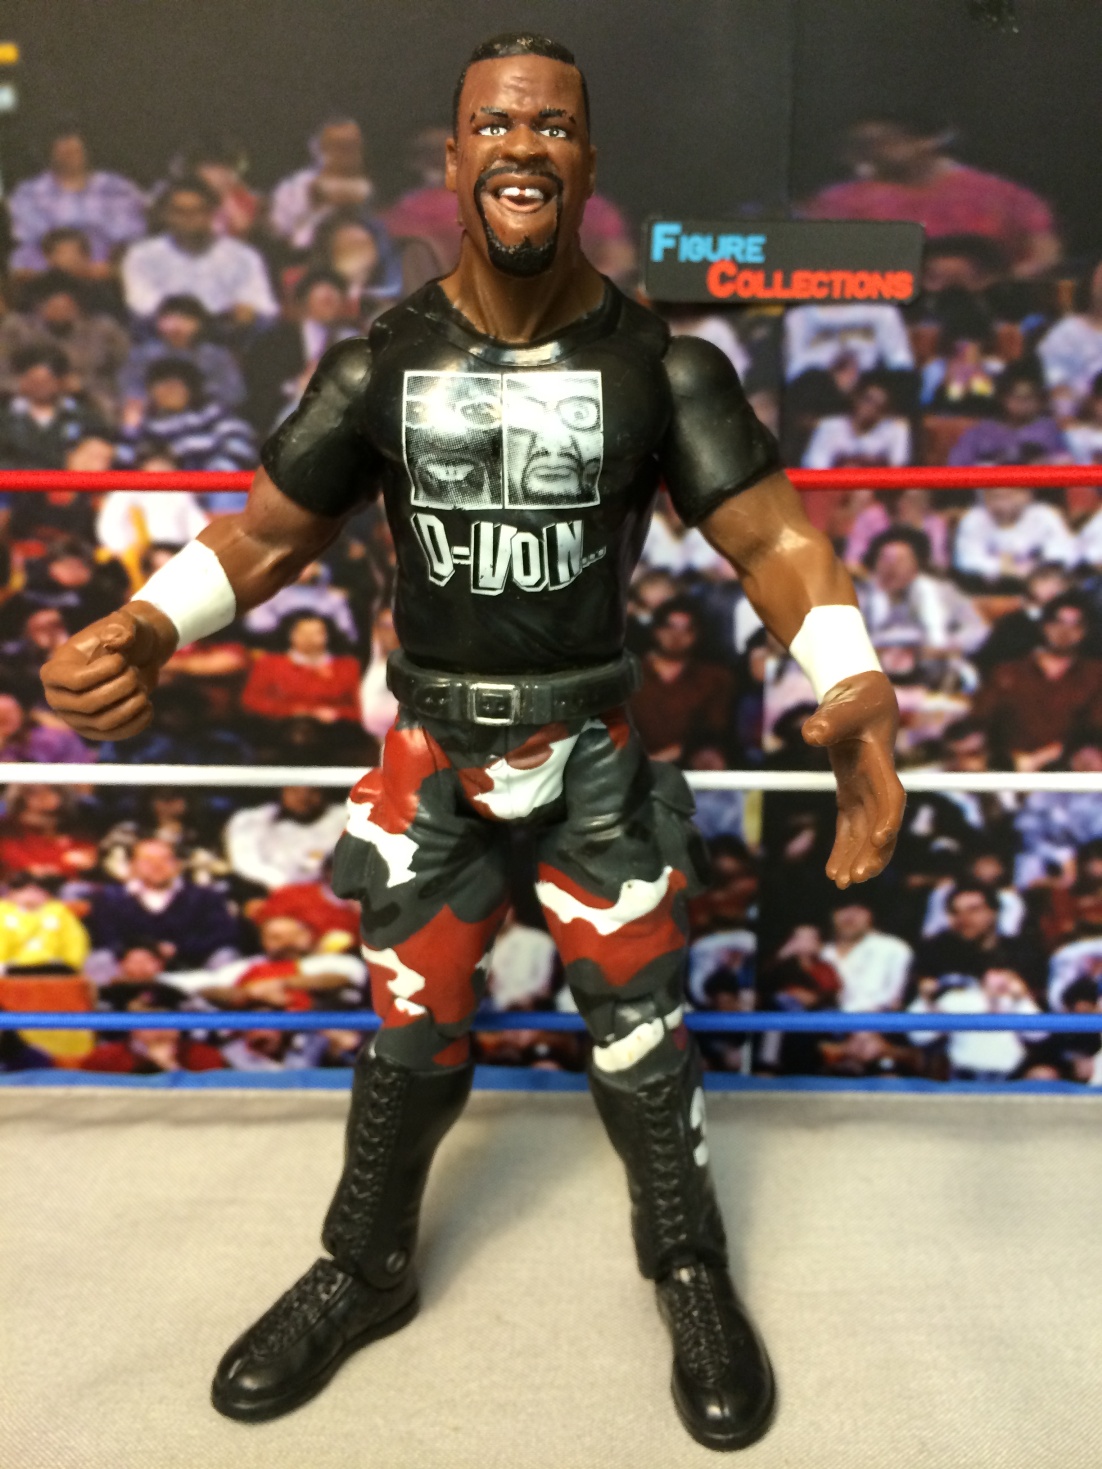 A Cold Day in Dudleyville (Bubba Ray Dudley, D-Von Dudley, The Rock)